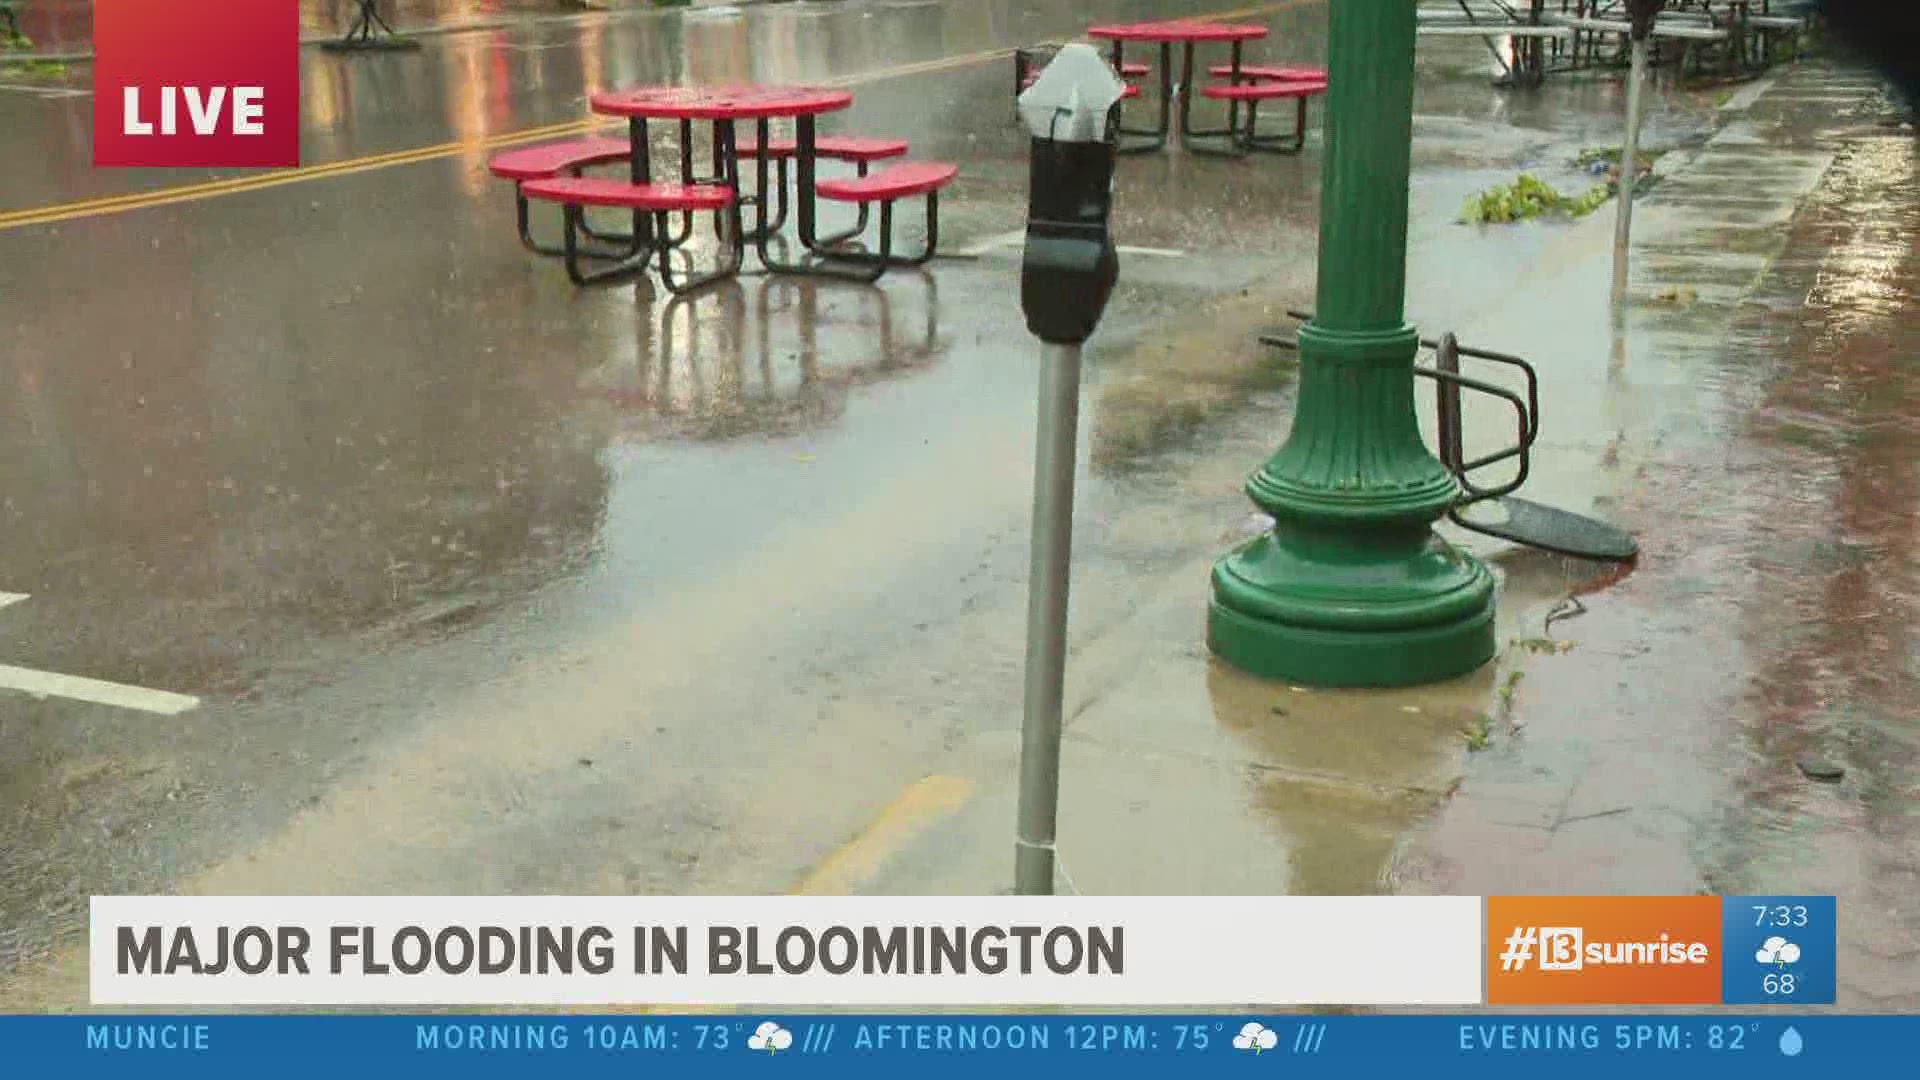 Sarah Jones reported live from Bloomington where overnight flood waters have receded.